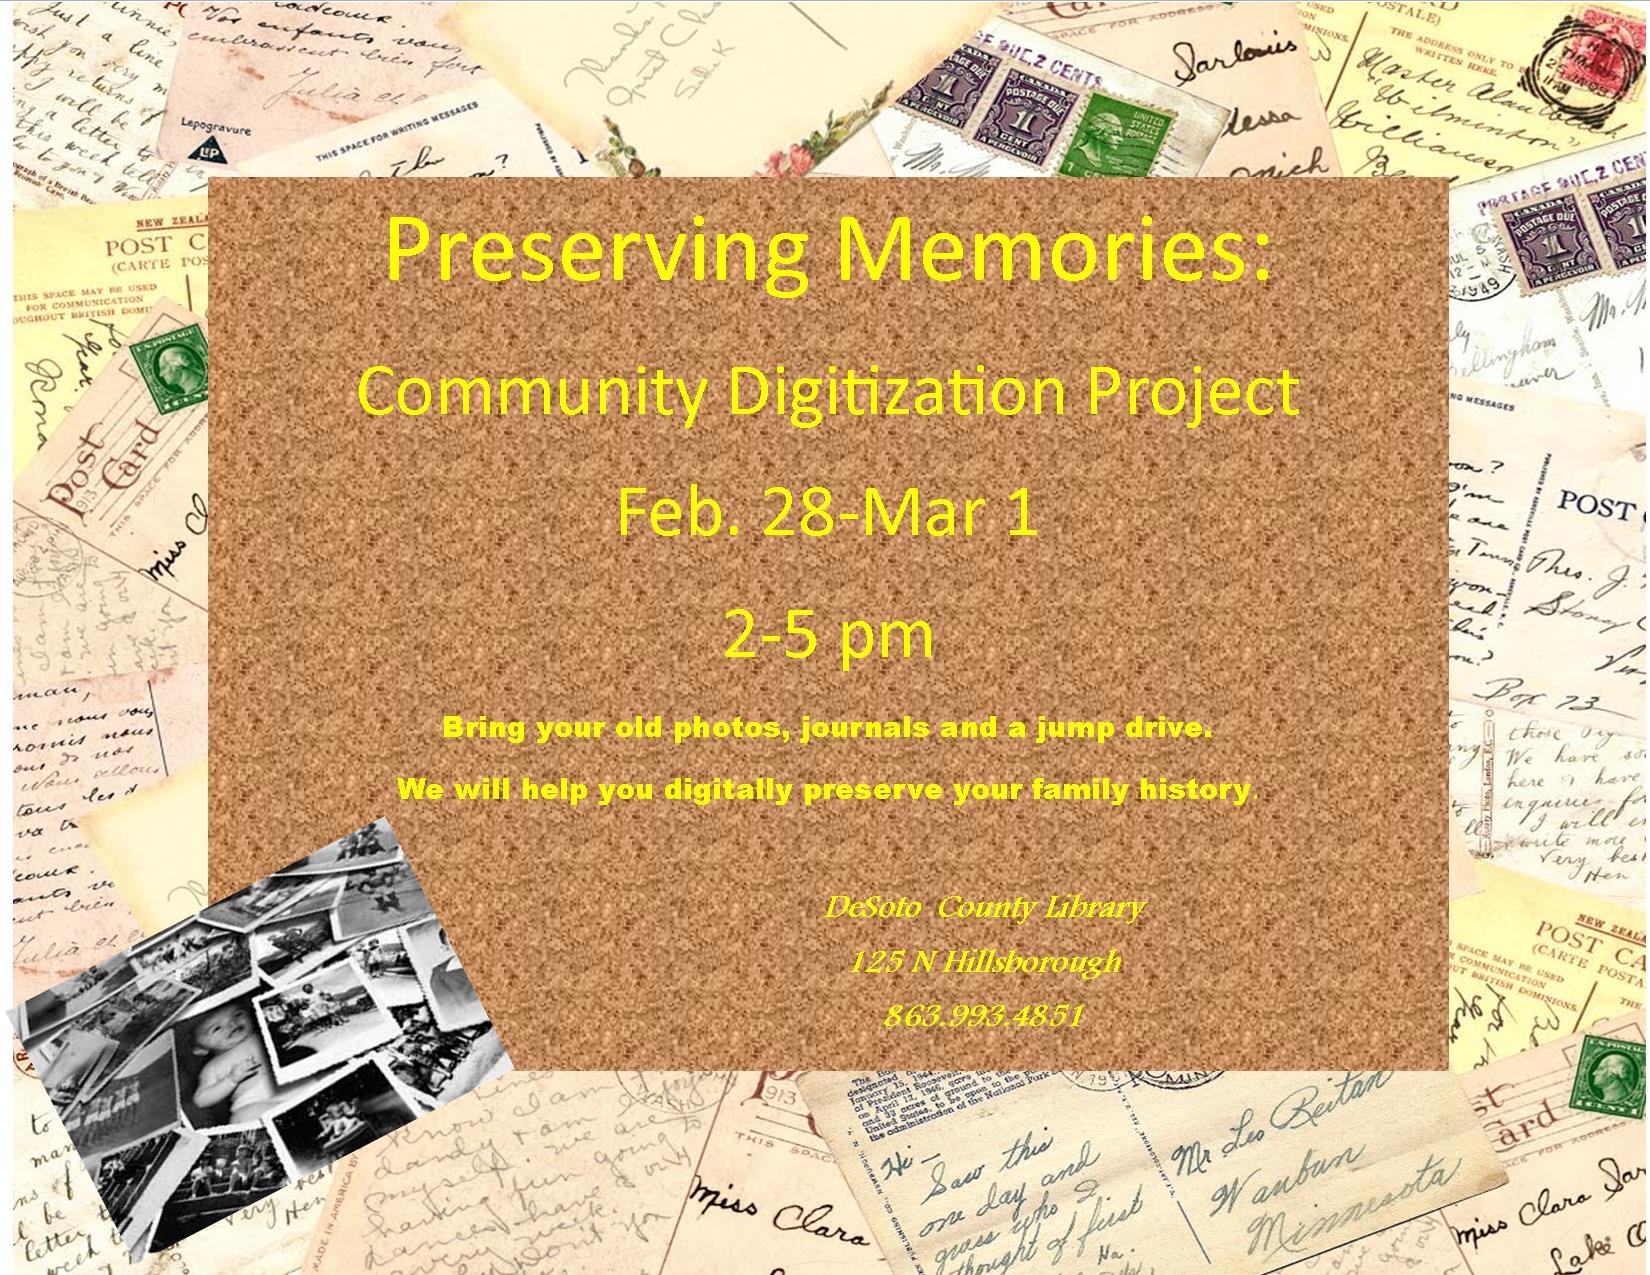 Preserving Memories at the DeSoto County Library through the Community Digitization Project